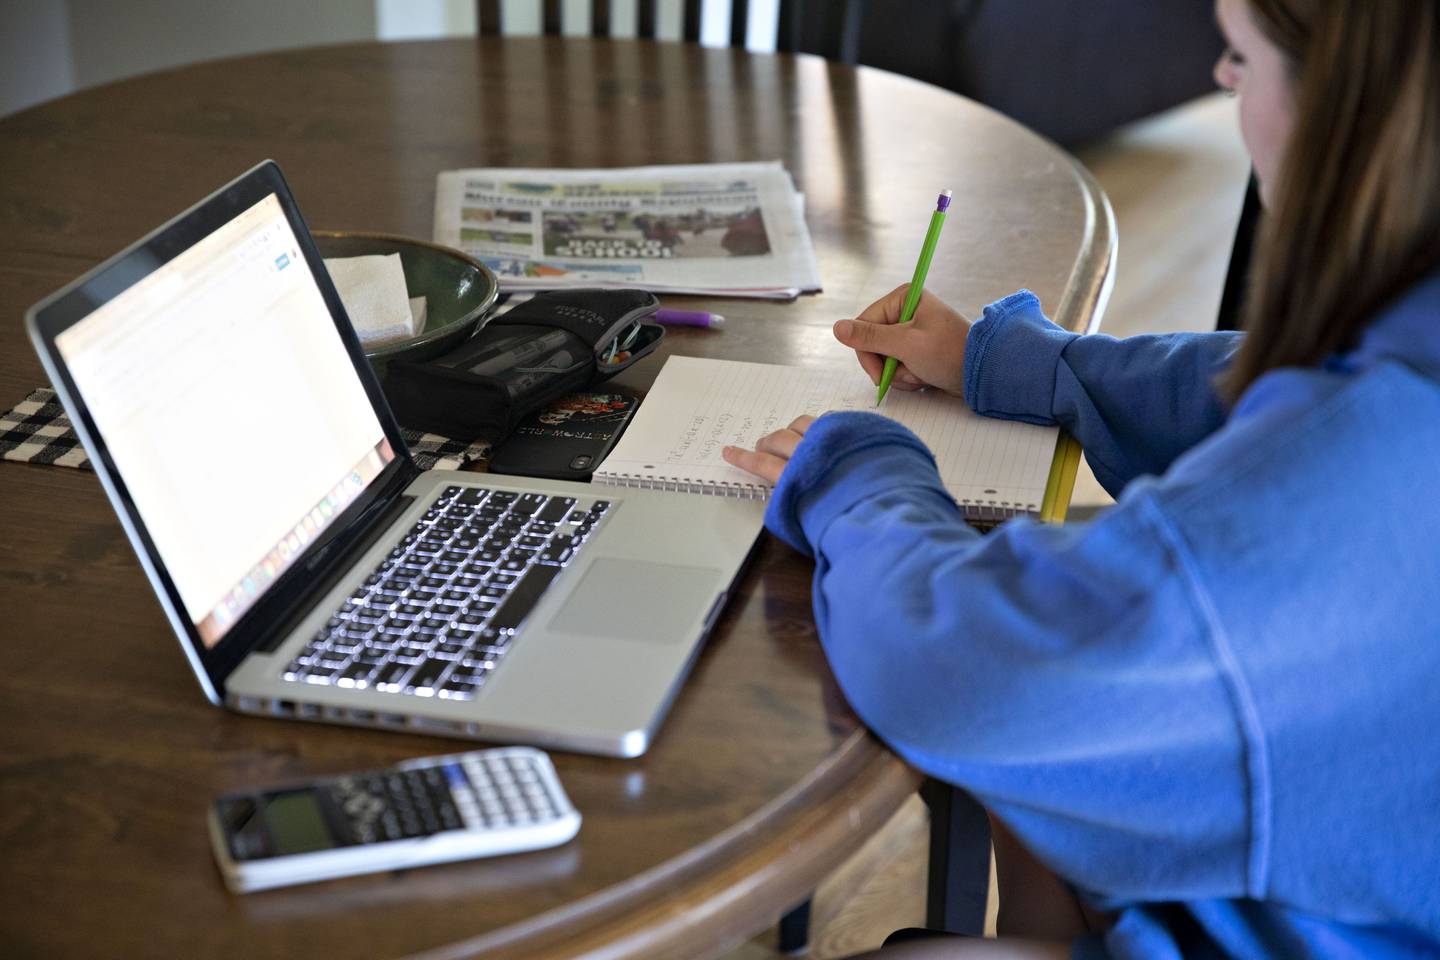 A high school student works on an assignment on a laptop computer at home during a remote learning day in Tiskilwa, Illinois, U.S., on Wednesday, Aug. 19, 2020. Illinois reported 1,337 new coronavirus cases Wednesday as the state's positivity rate dropped below 4% for the first time in weeks. Photographer: Daniel Acker/Bloomberg